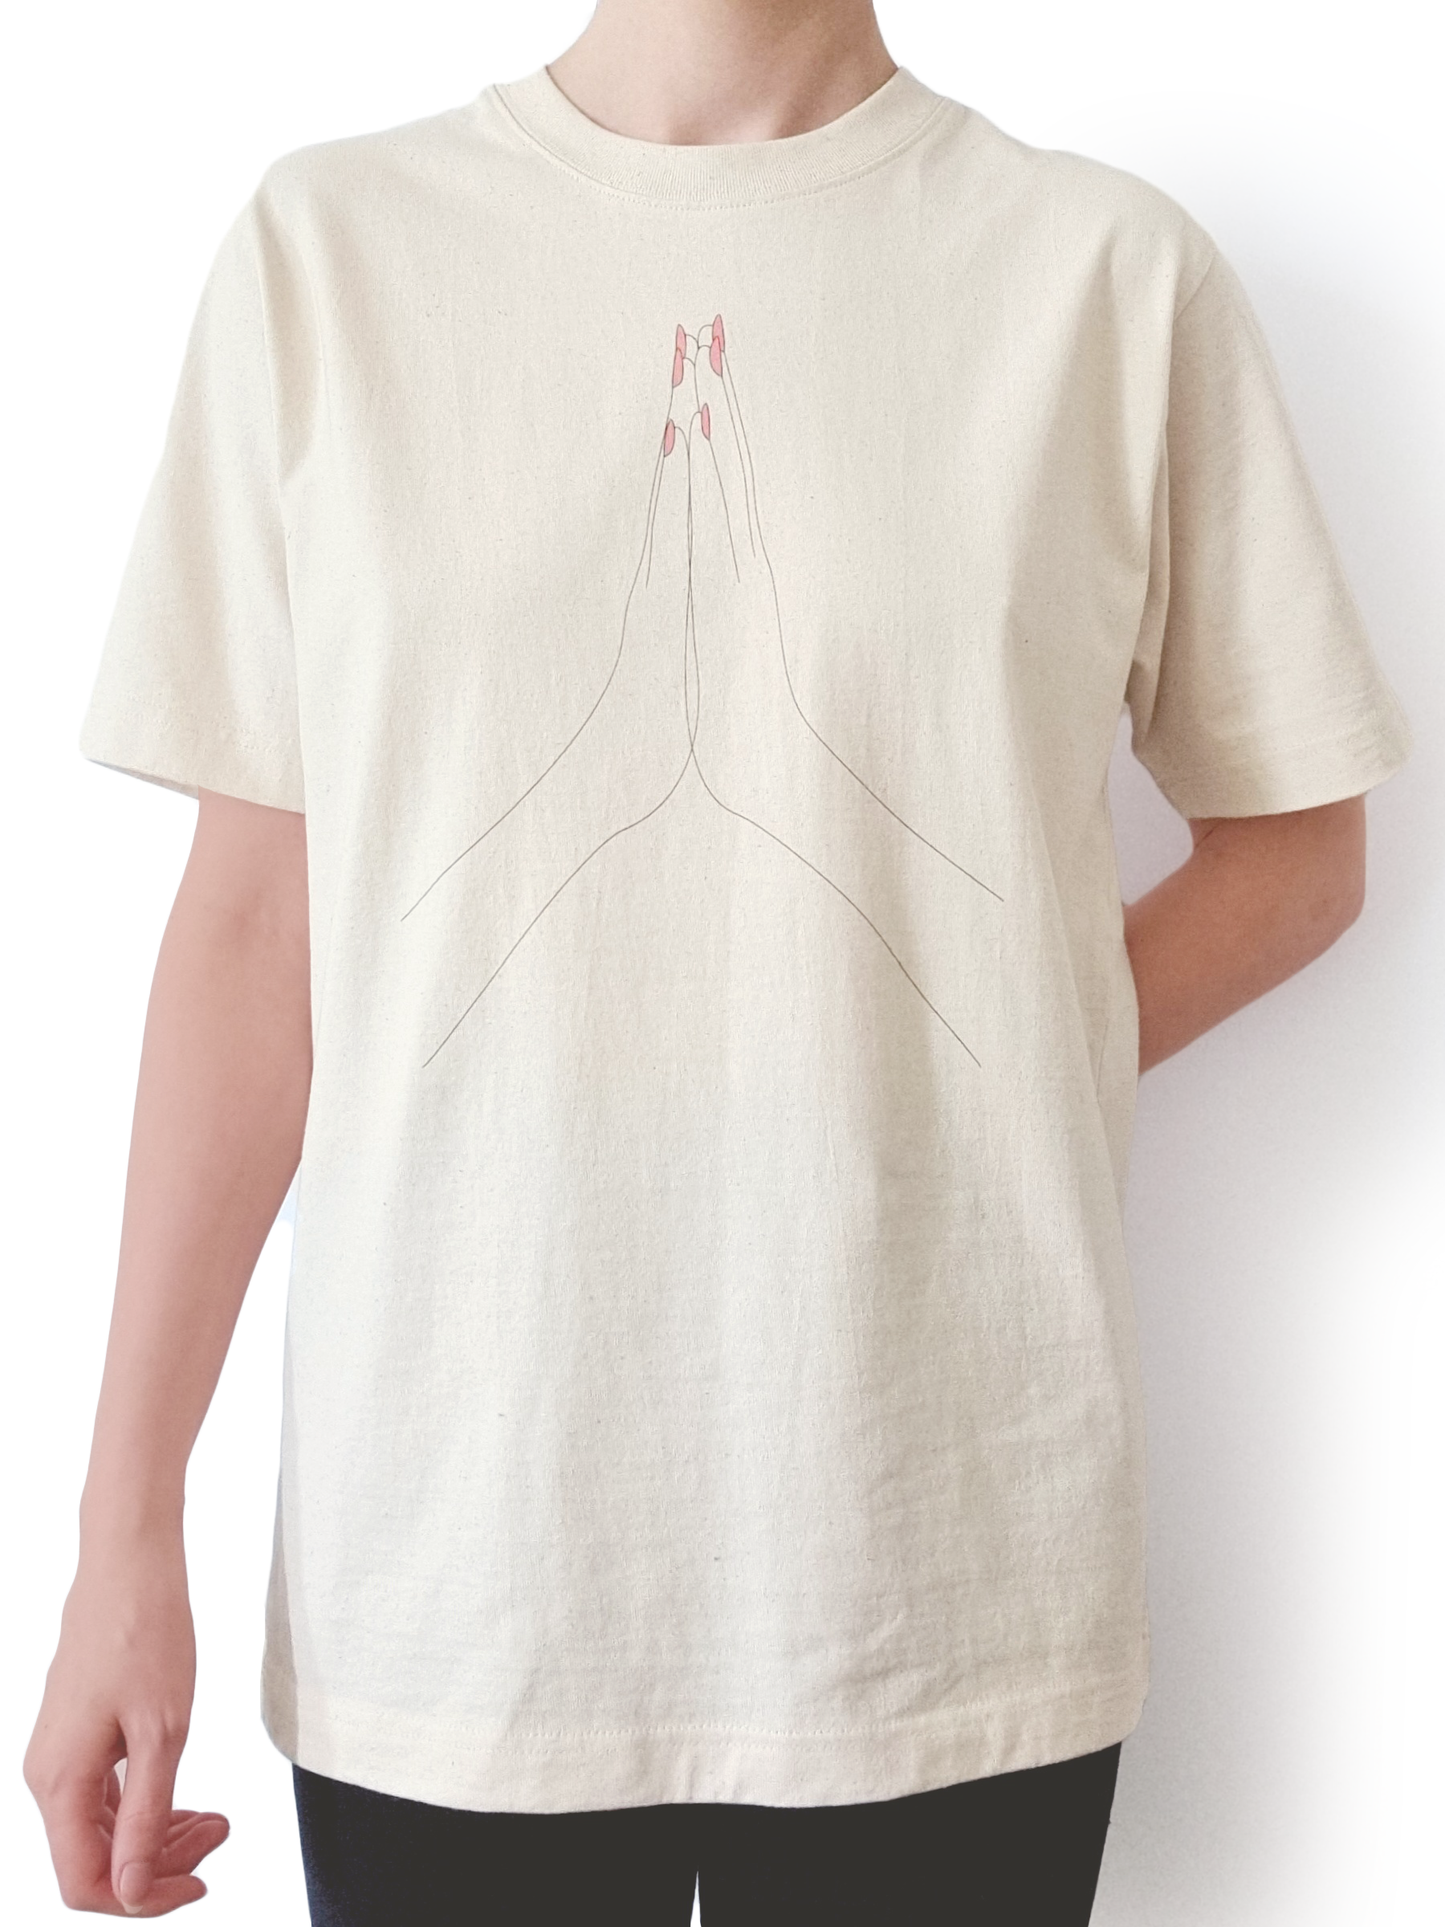 Ethical and sustainable, natural raw organic cotton tee / t shirt with a printed namaste / spiritual / prayer design for yoga, gym, or lounge wear.